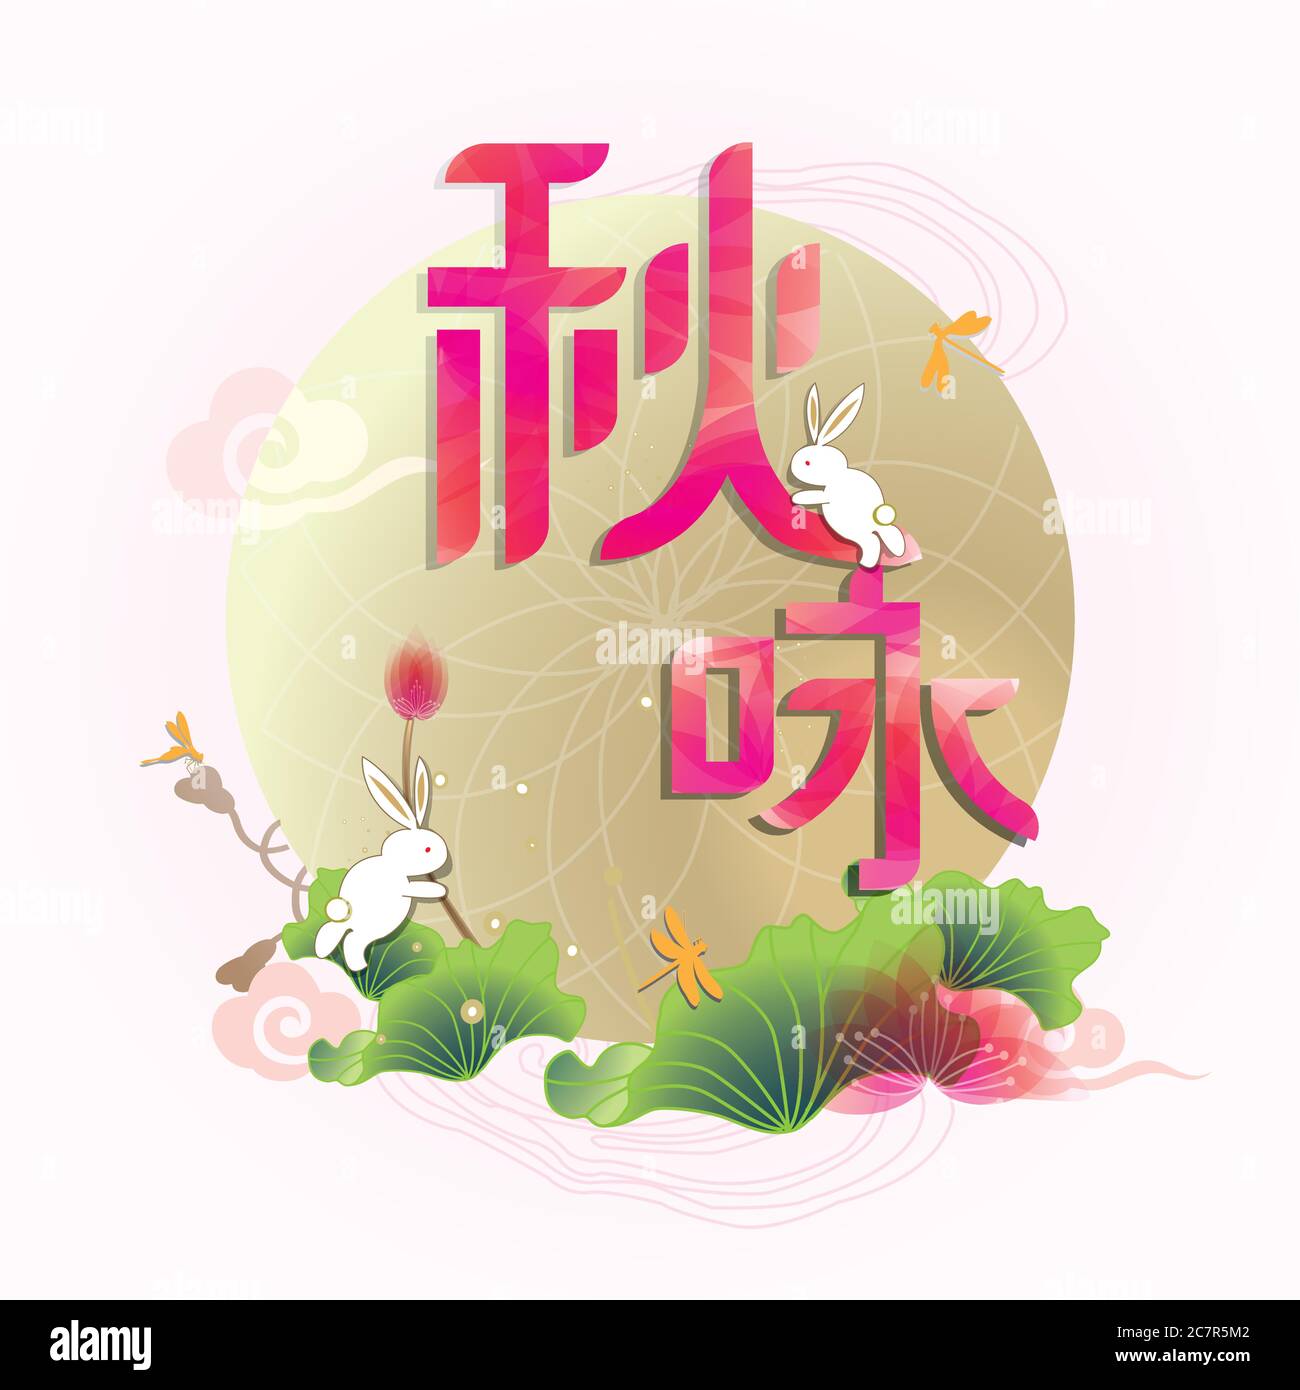 Masthead design for Mid autumn festival design. Its a autumn harvest festival celebrated by Chinese. Translation wording: Winter rhythm and melody. Stock Vector